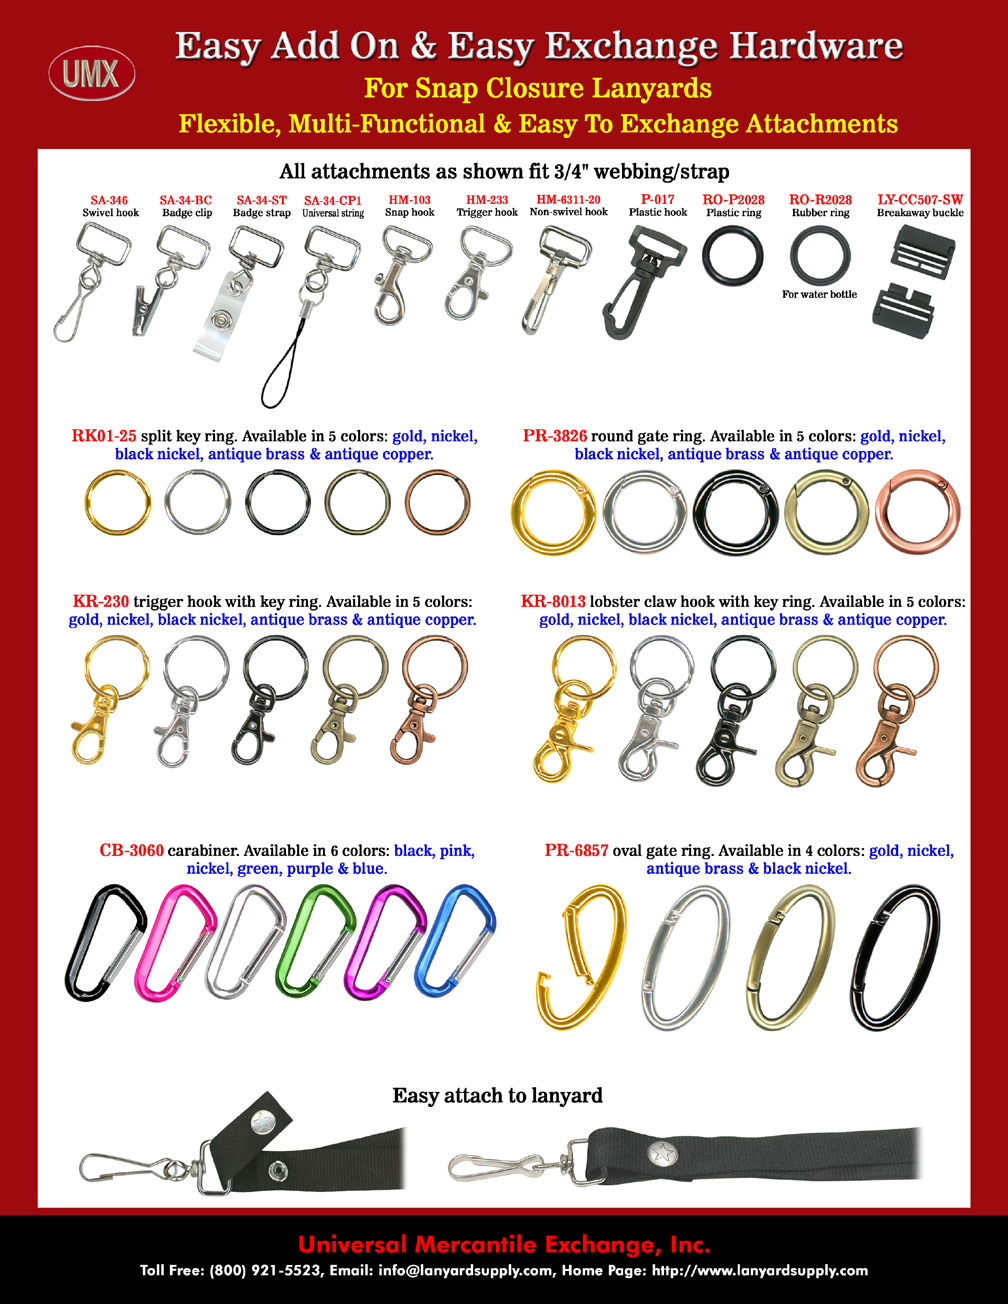 Listing of Easy-Add-On Hardware Attachment For 3/4&quot Snap-On Lanyards.